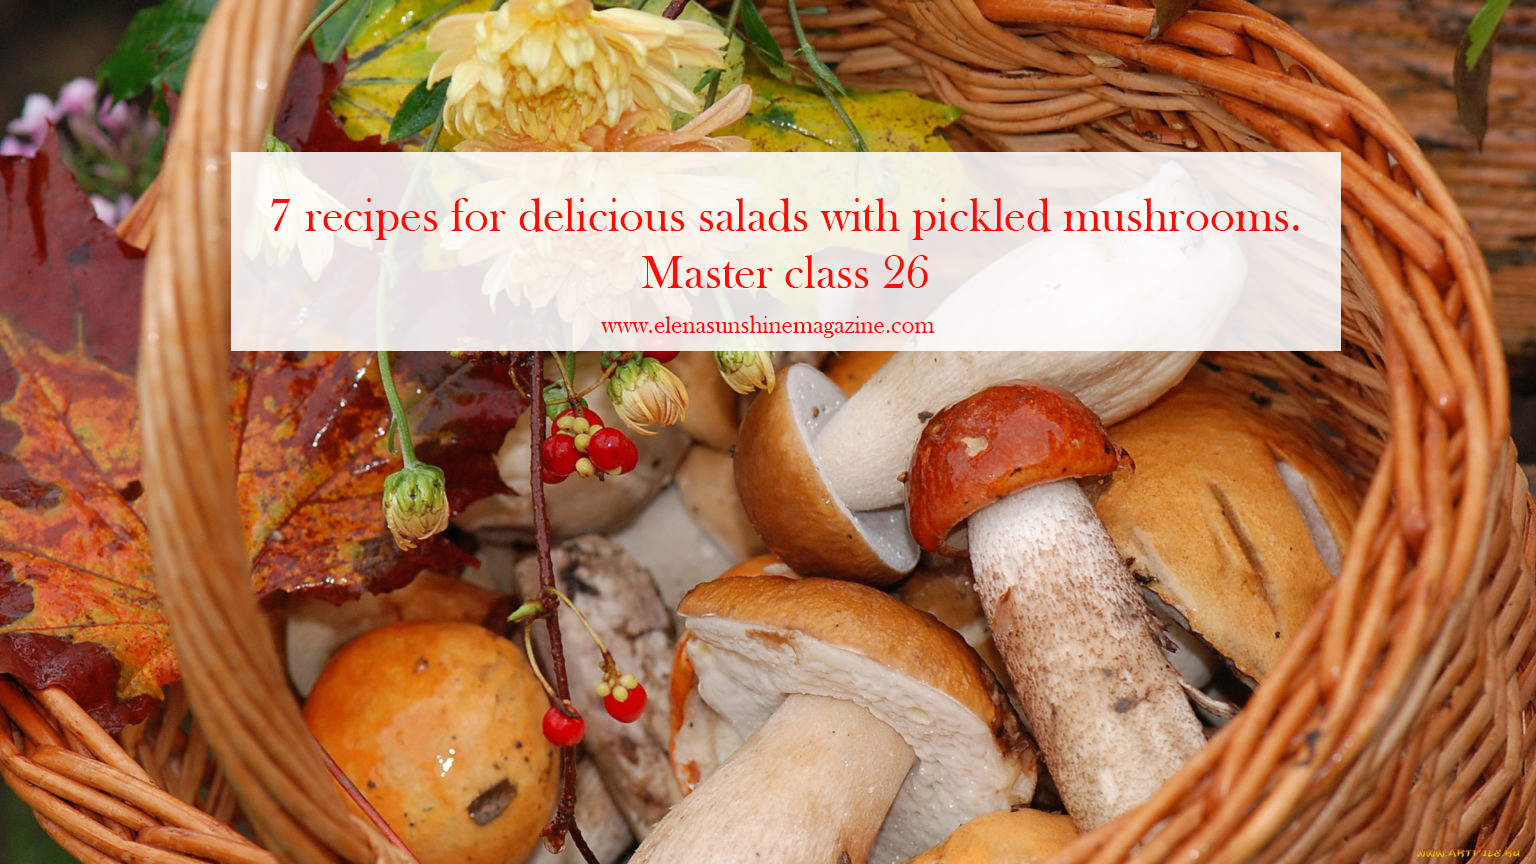 7 recipes for delicious salads with pickled mushrooms. Master class 26